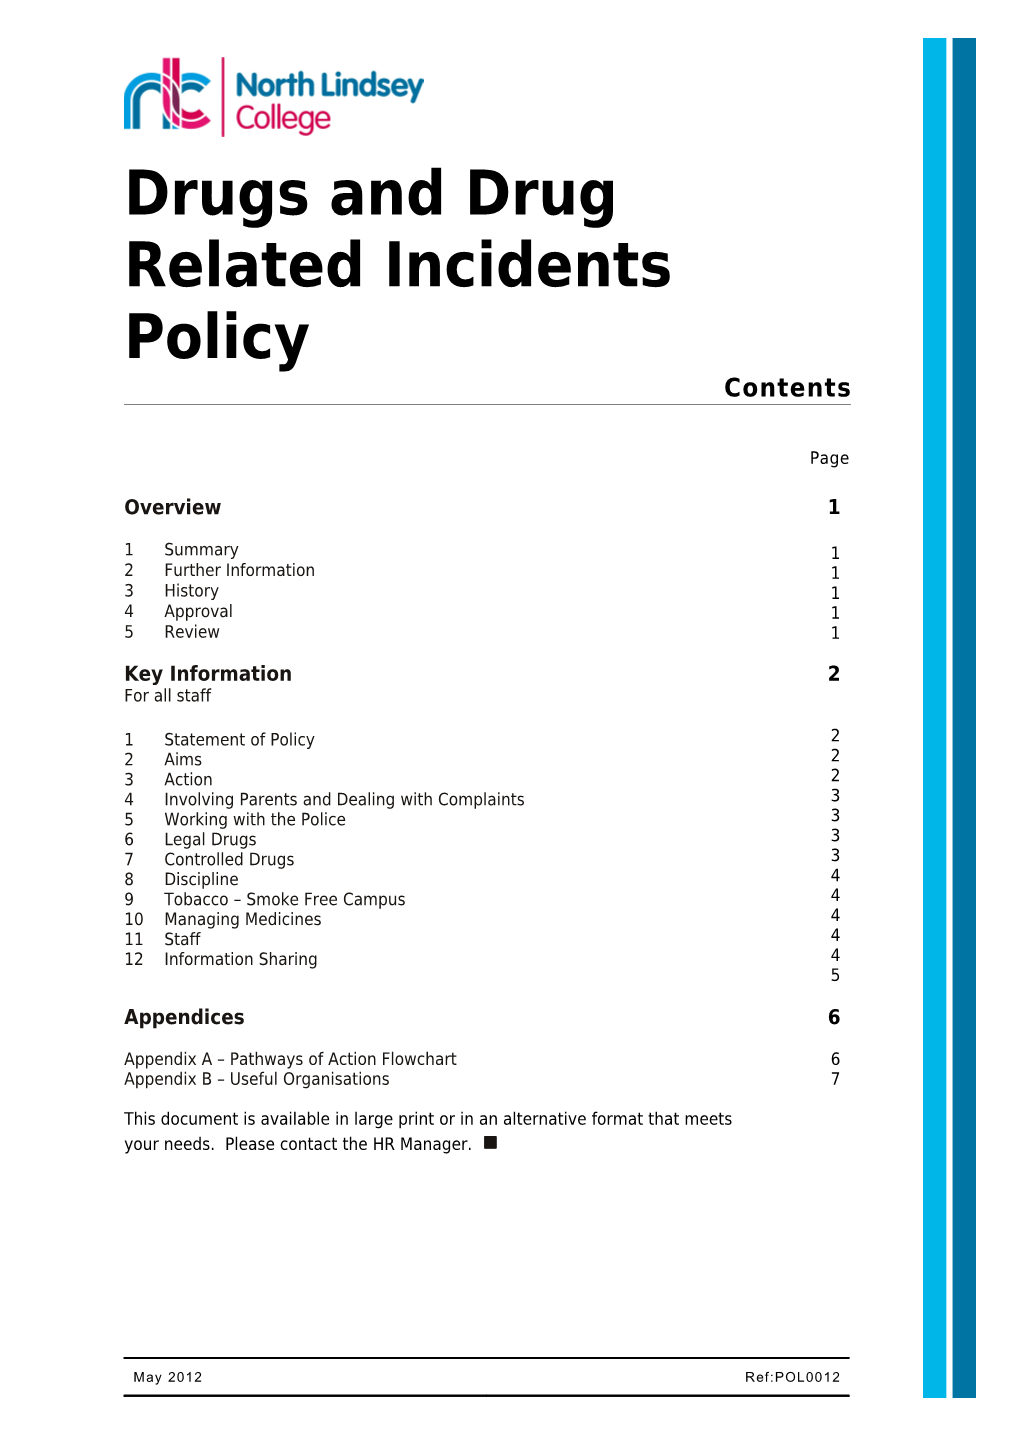 Drugs and Drug Related Incidents Policy